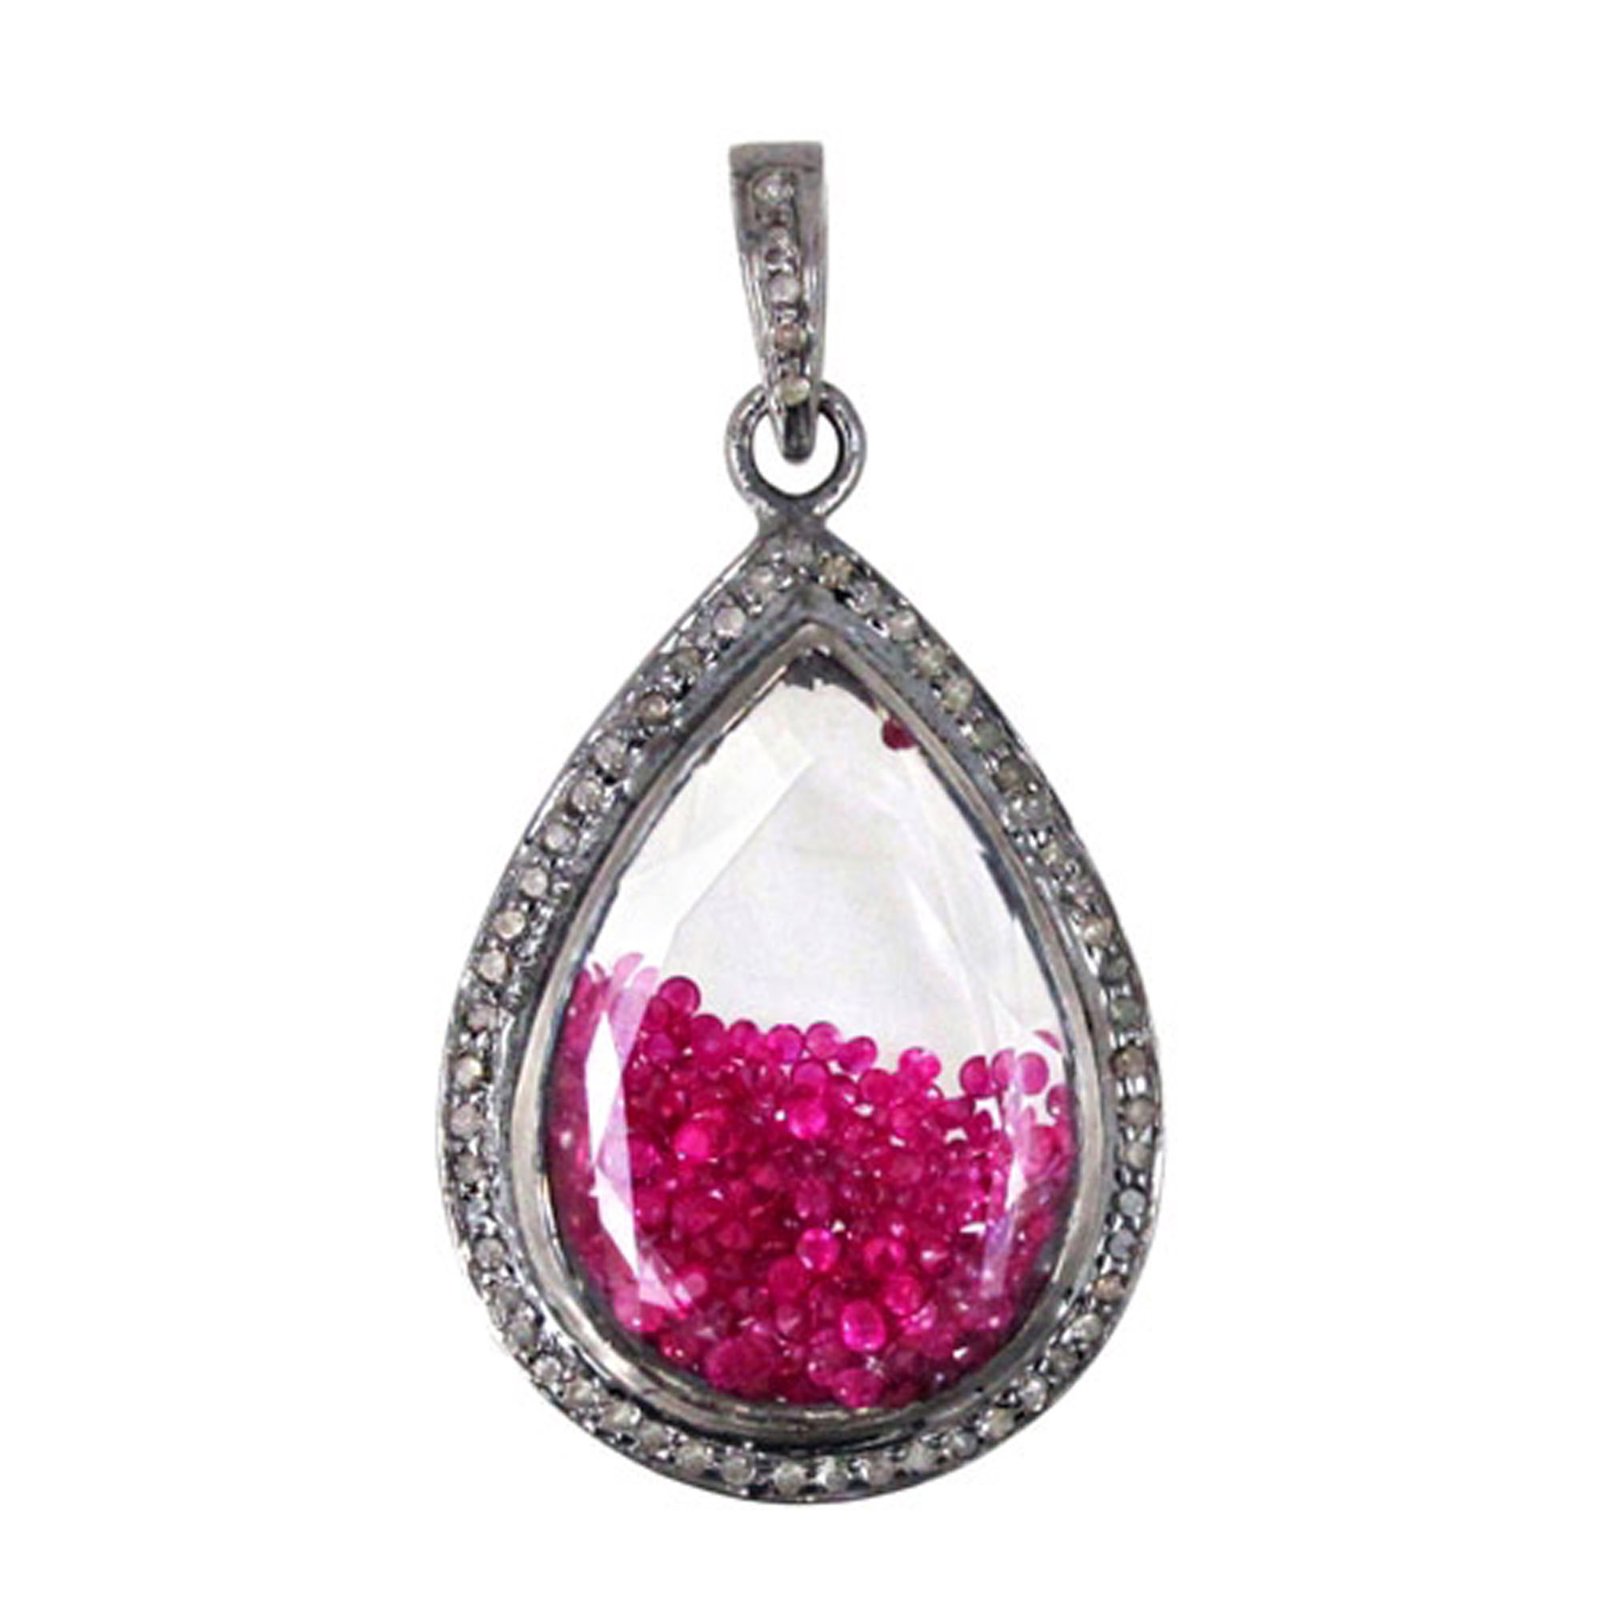 Real diamond crystal shaker pendant made in 925 sterling silver